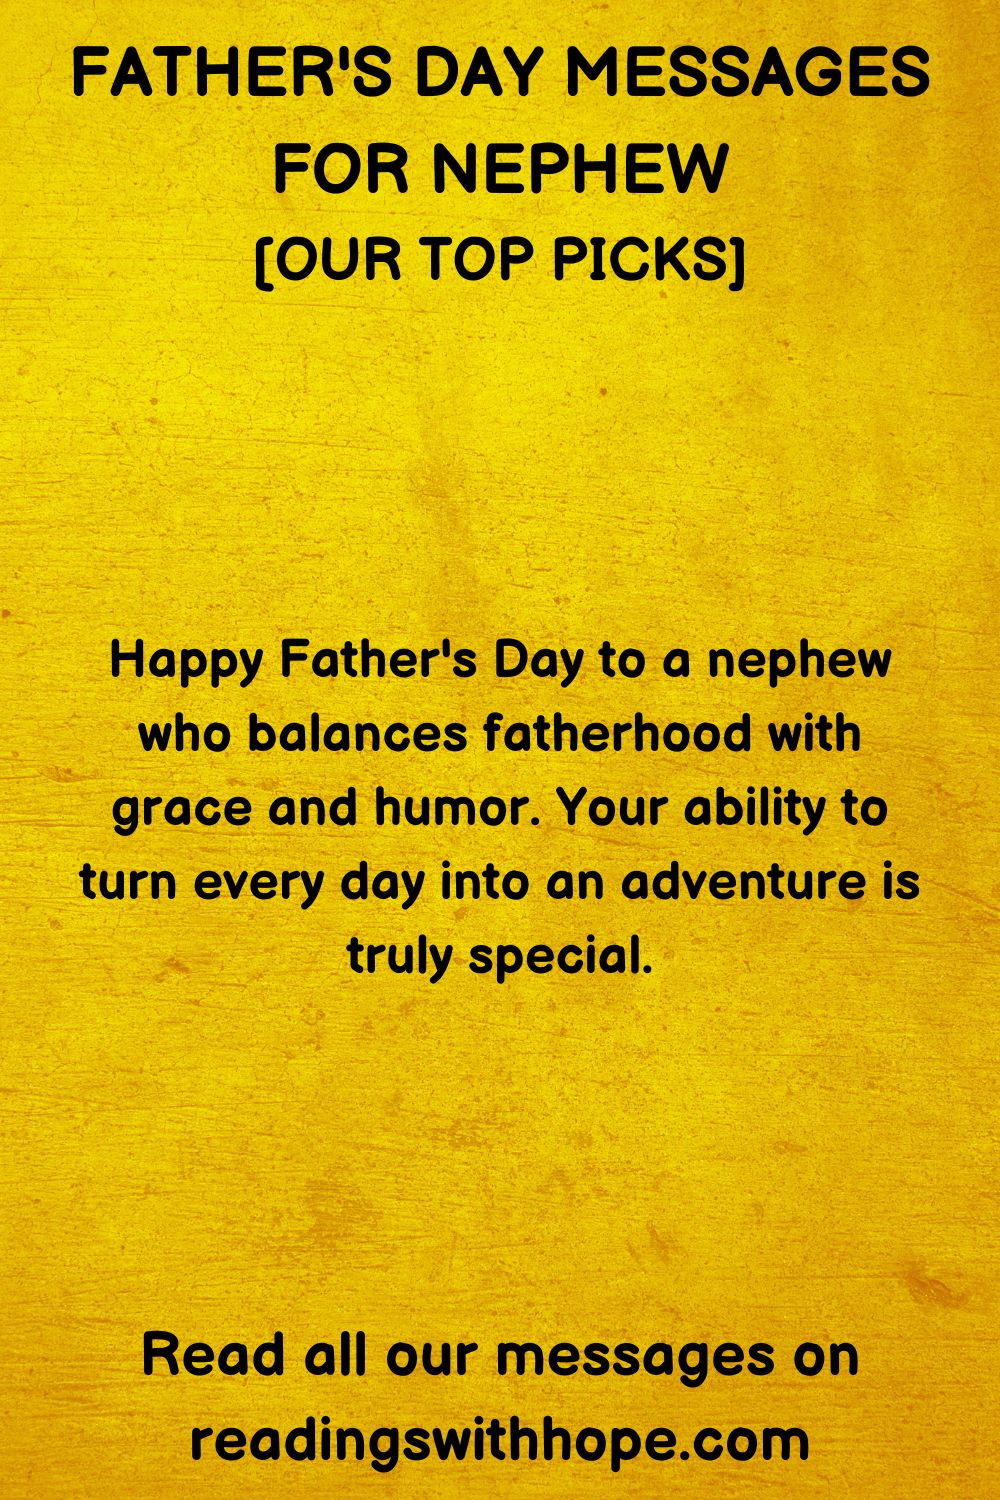 Father's Day Message for Nephew